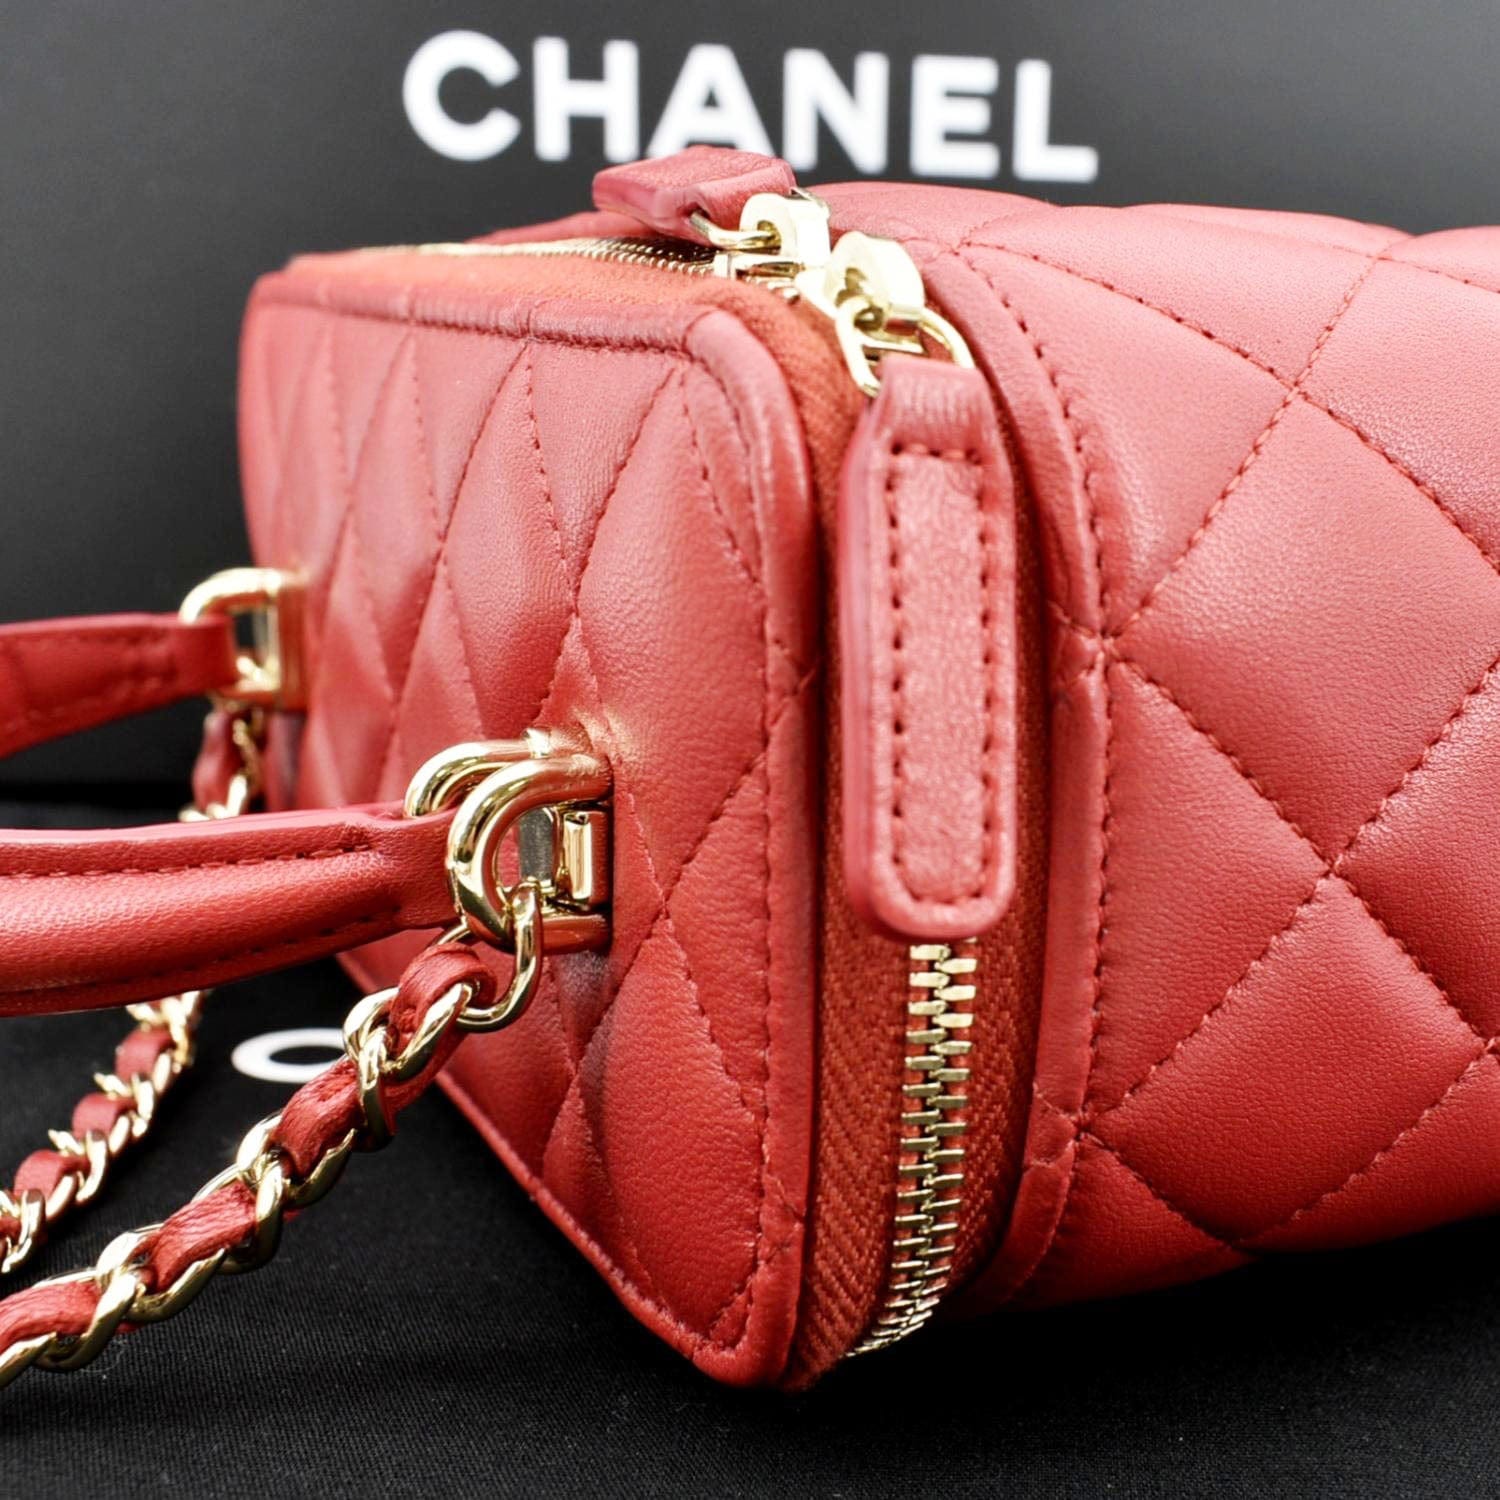 CHANEL Vanity Case Quilted Leather Crossbody Bag Red